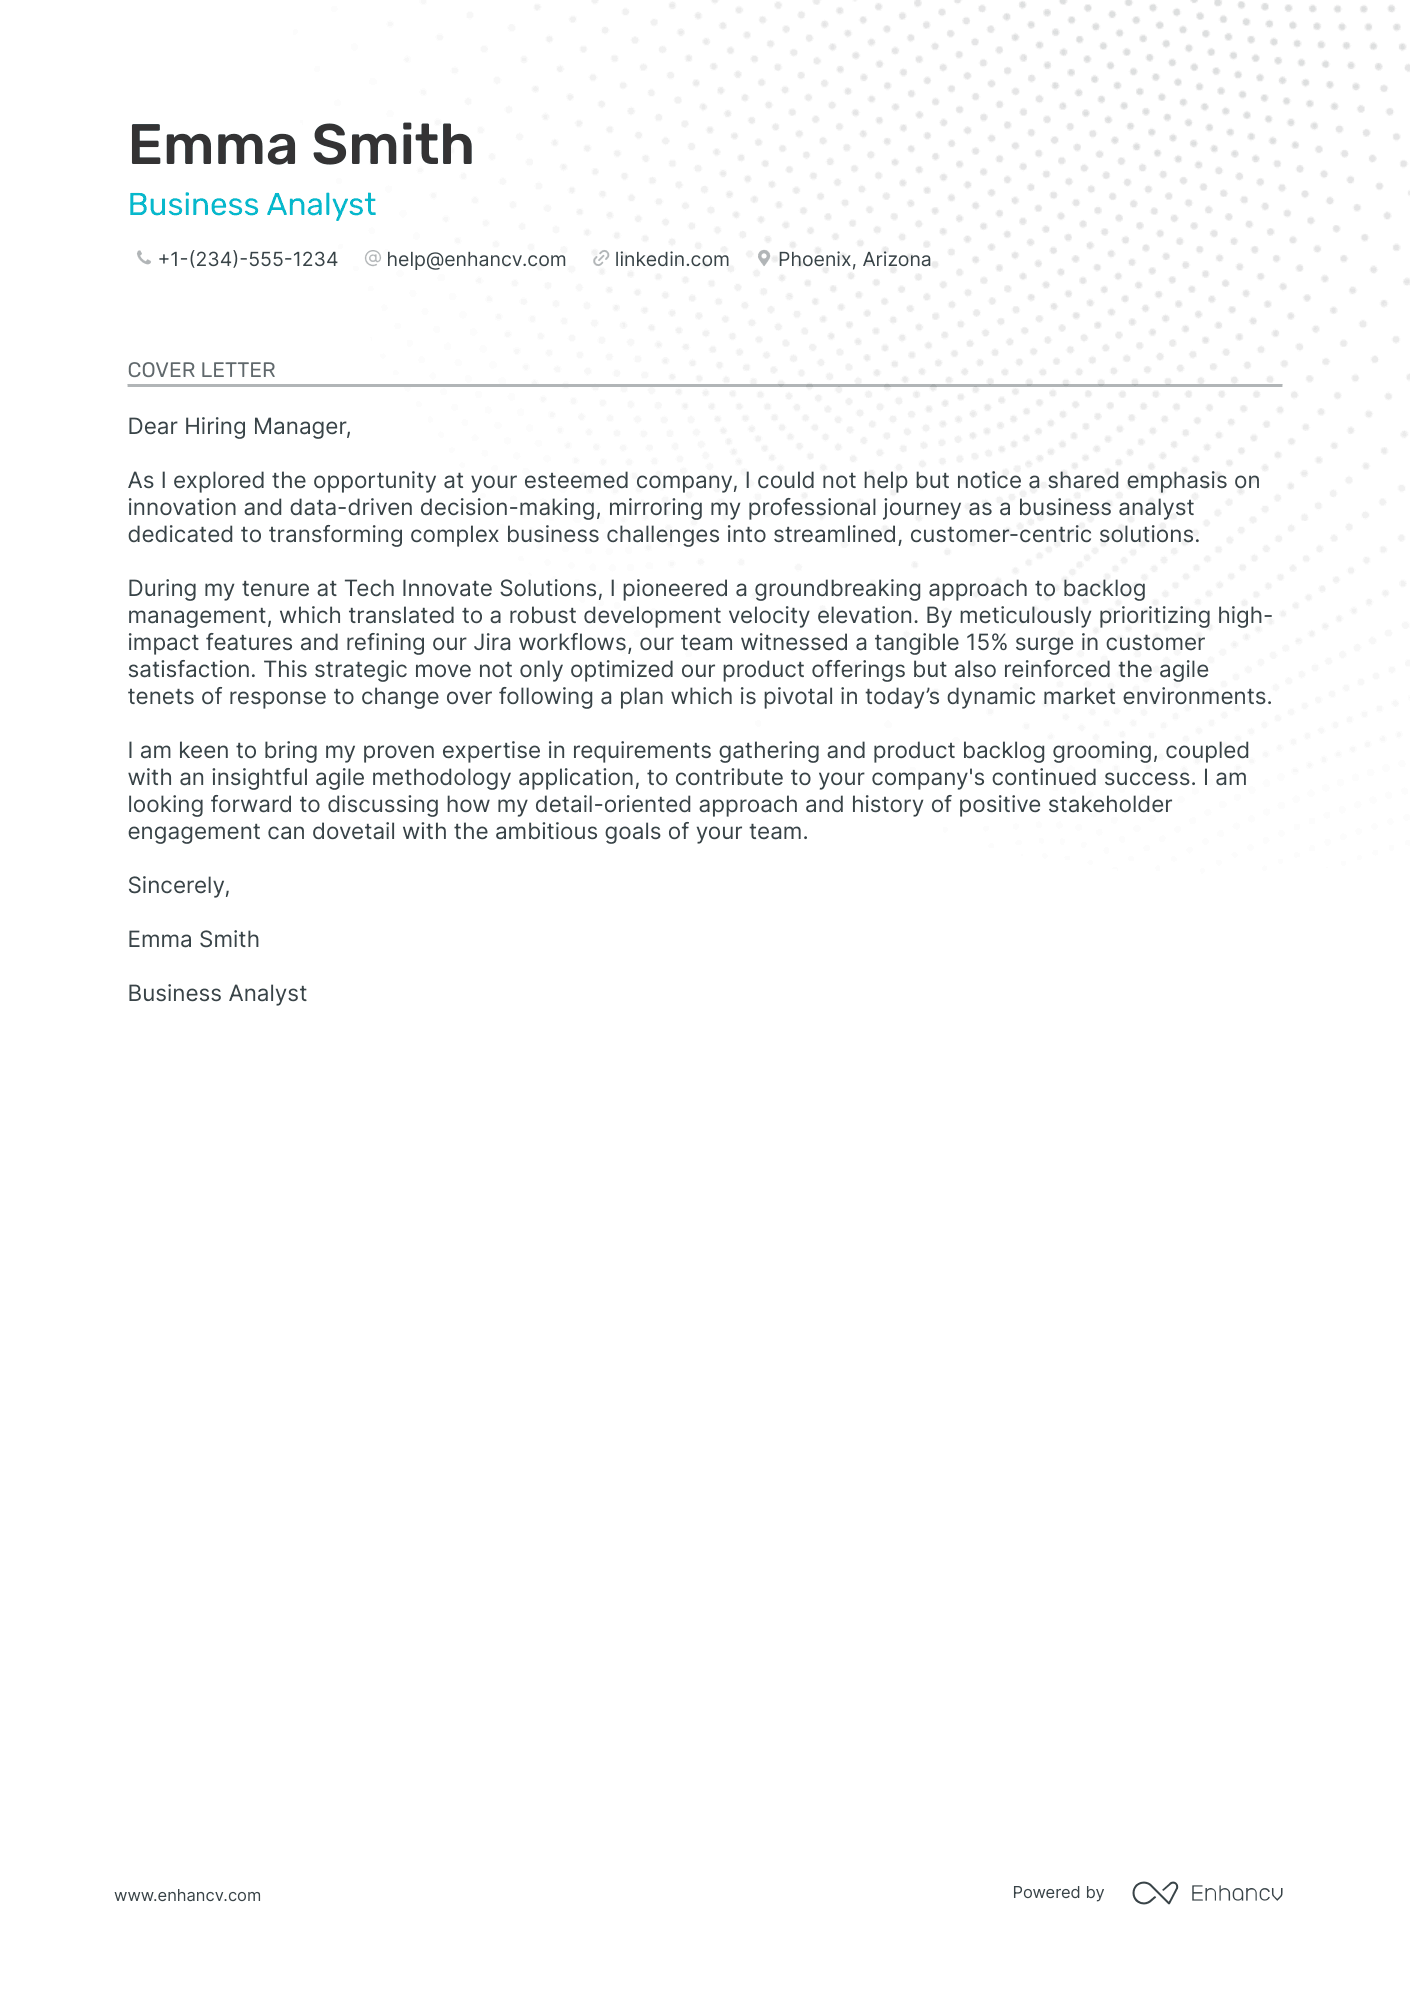 cover letter for the post of a business analyst